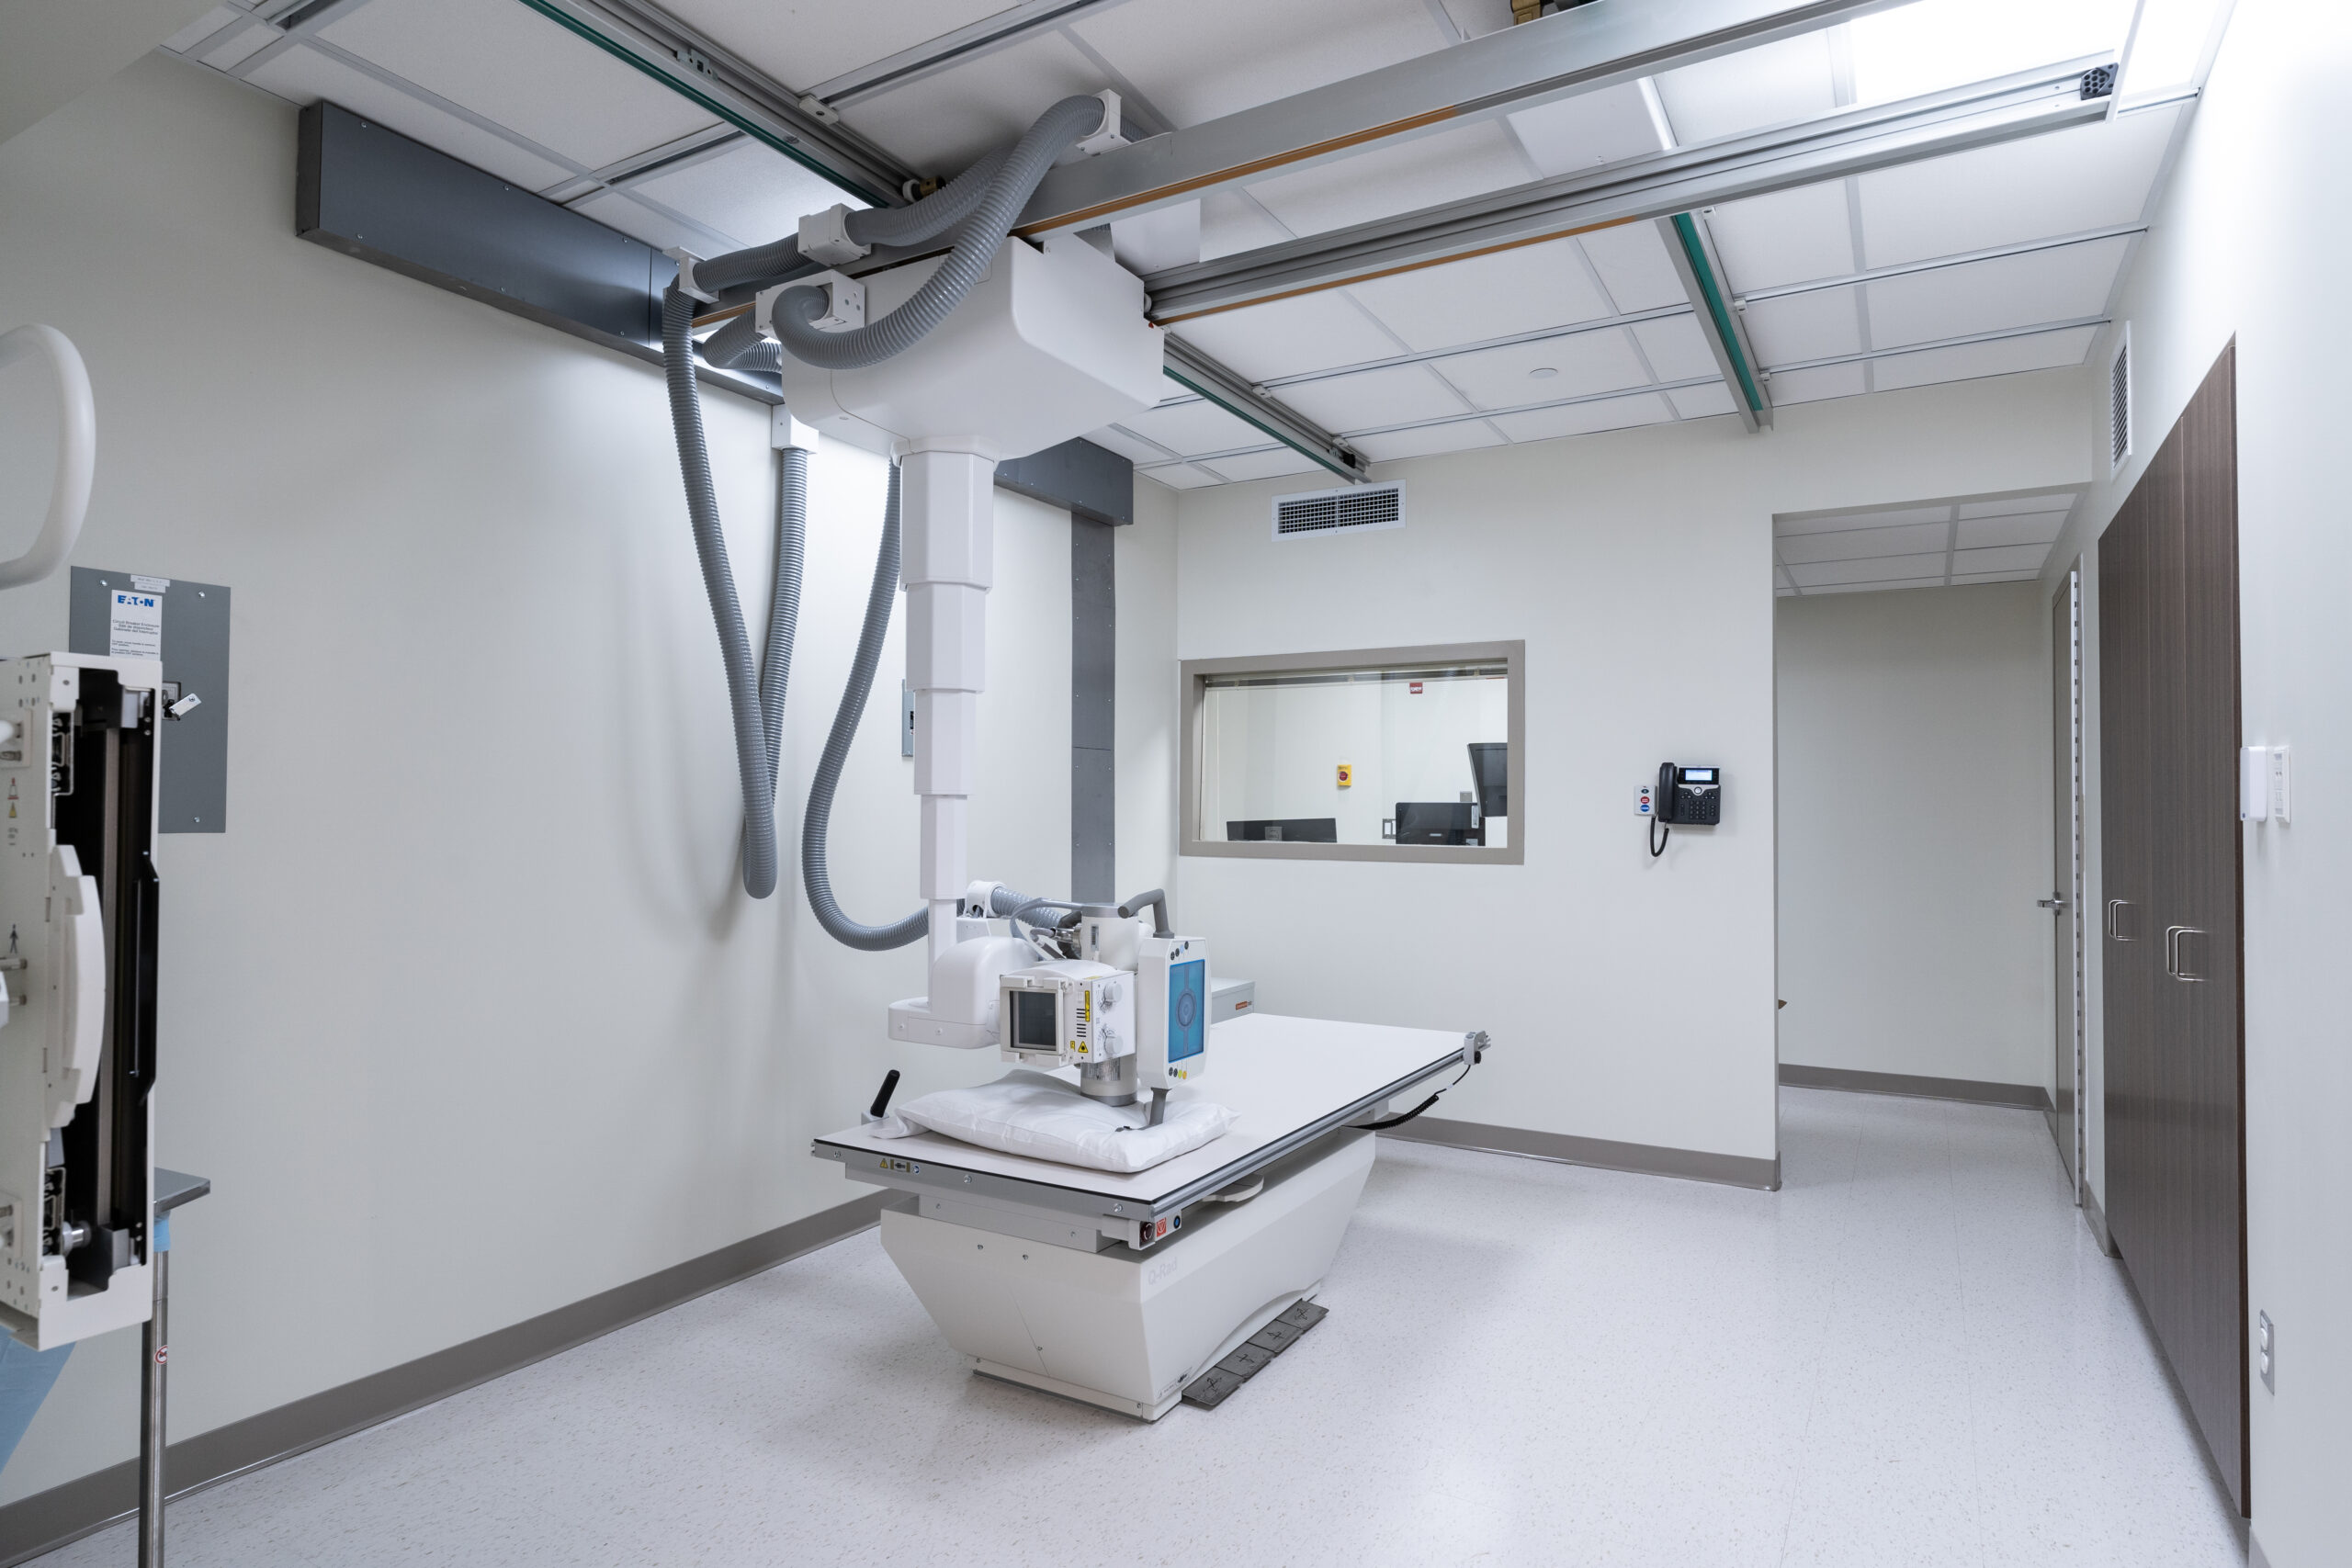 A health equipment installed in a medical room